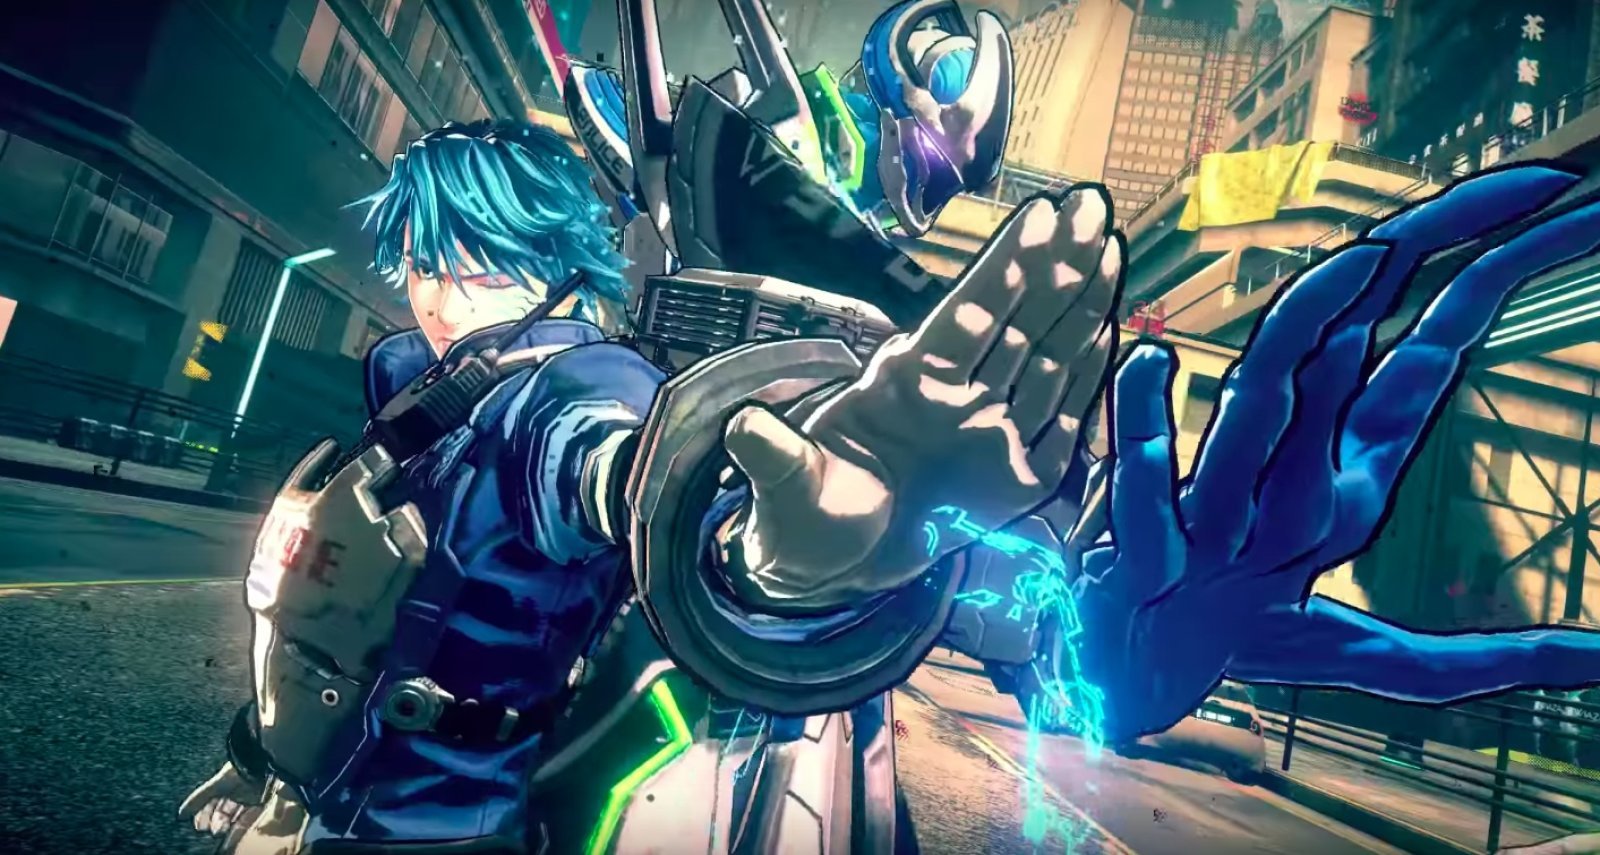 Astral Chain has been announced at the latest Nintendo Direct